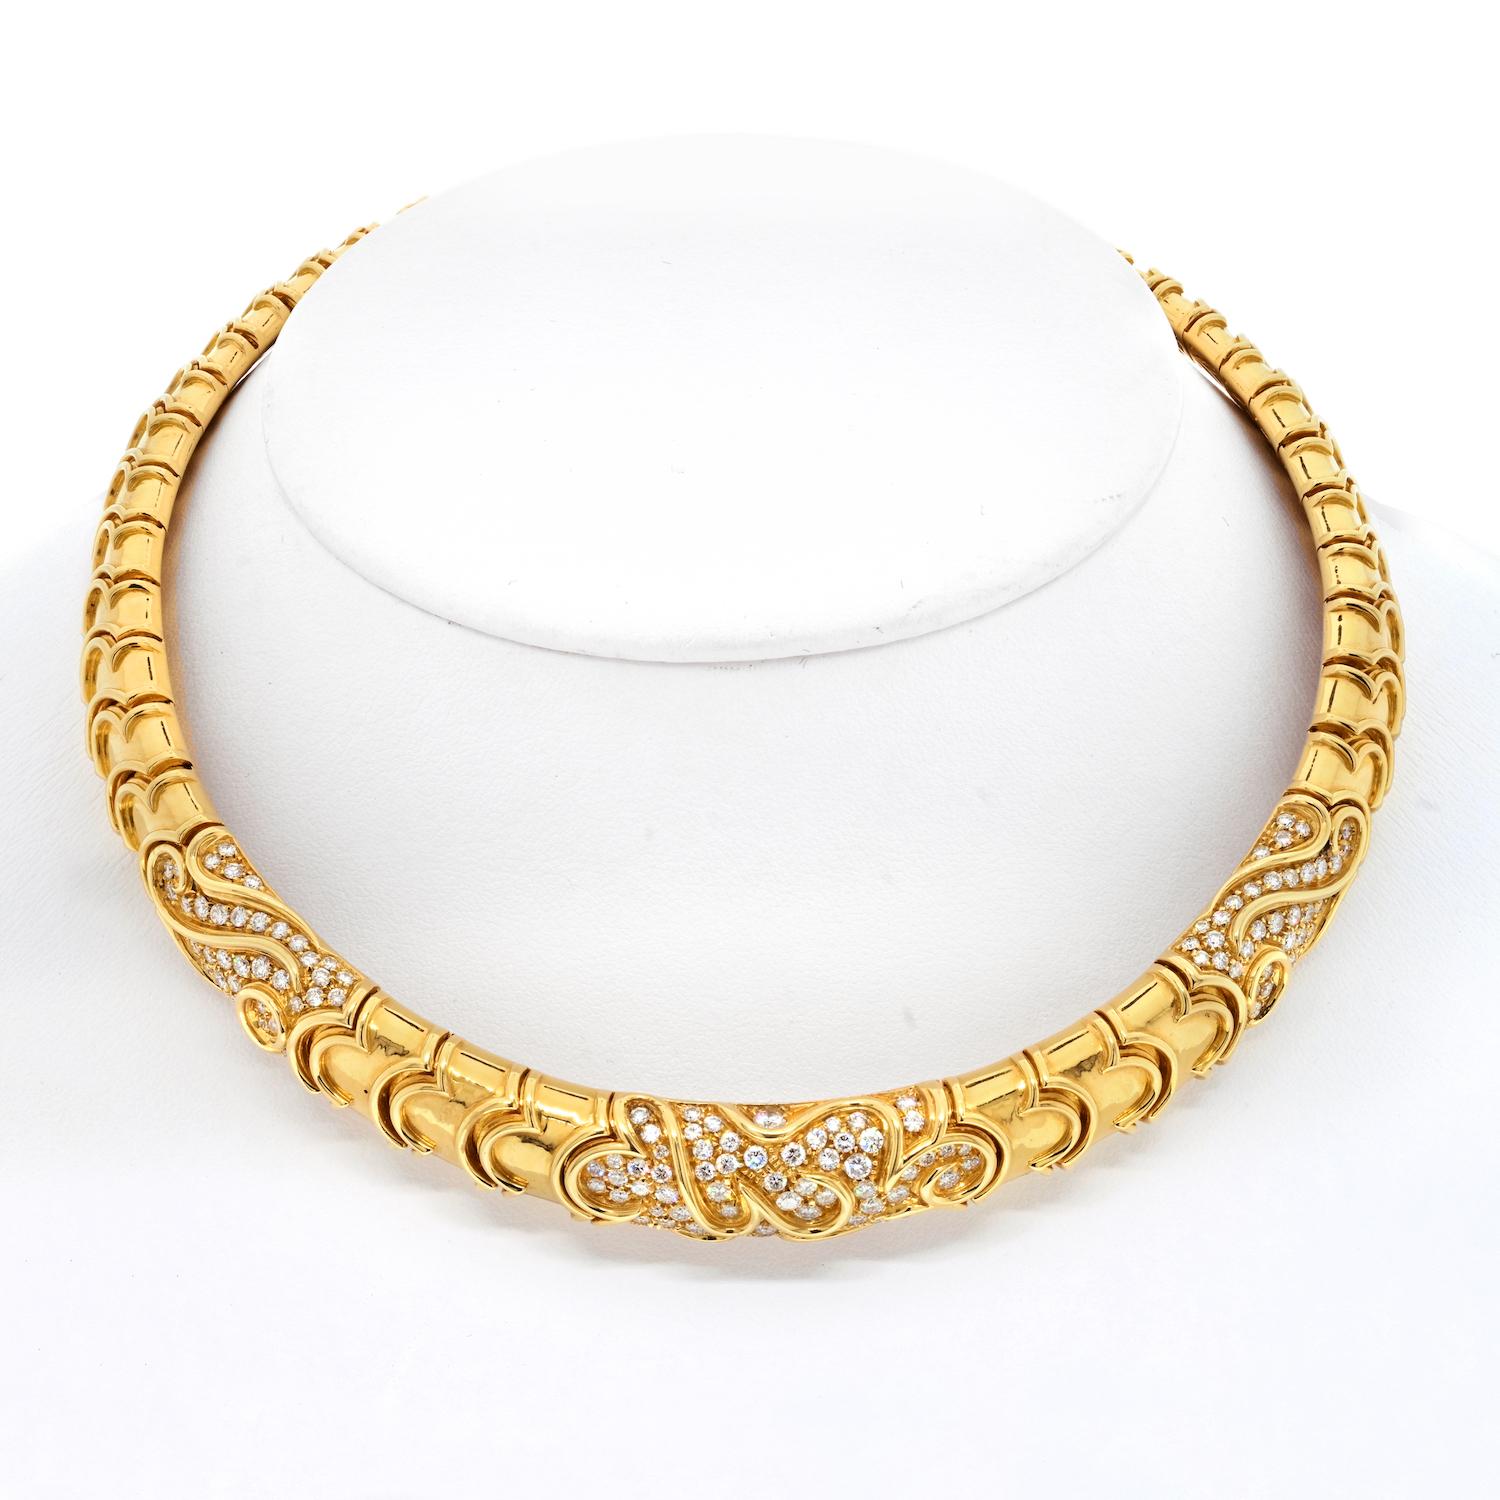 This timeless designer diamond choker is crafted in solid 18-karat yellow gold signed by Bvlgari. Brilliant-cut diamonds highlight the flexible collar necklace. 

Featuring solid gold links and decorative scrolls along with pave set diamonds this